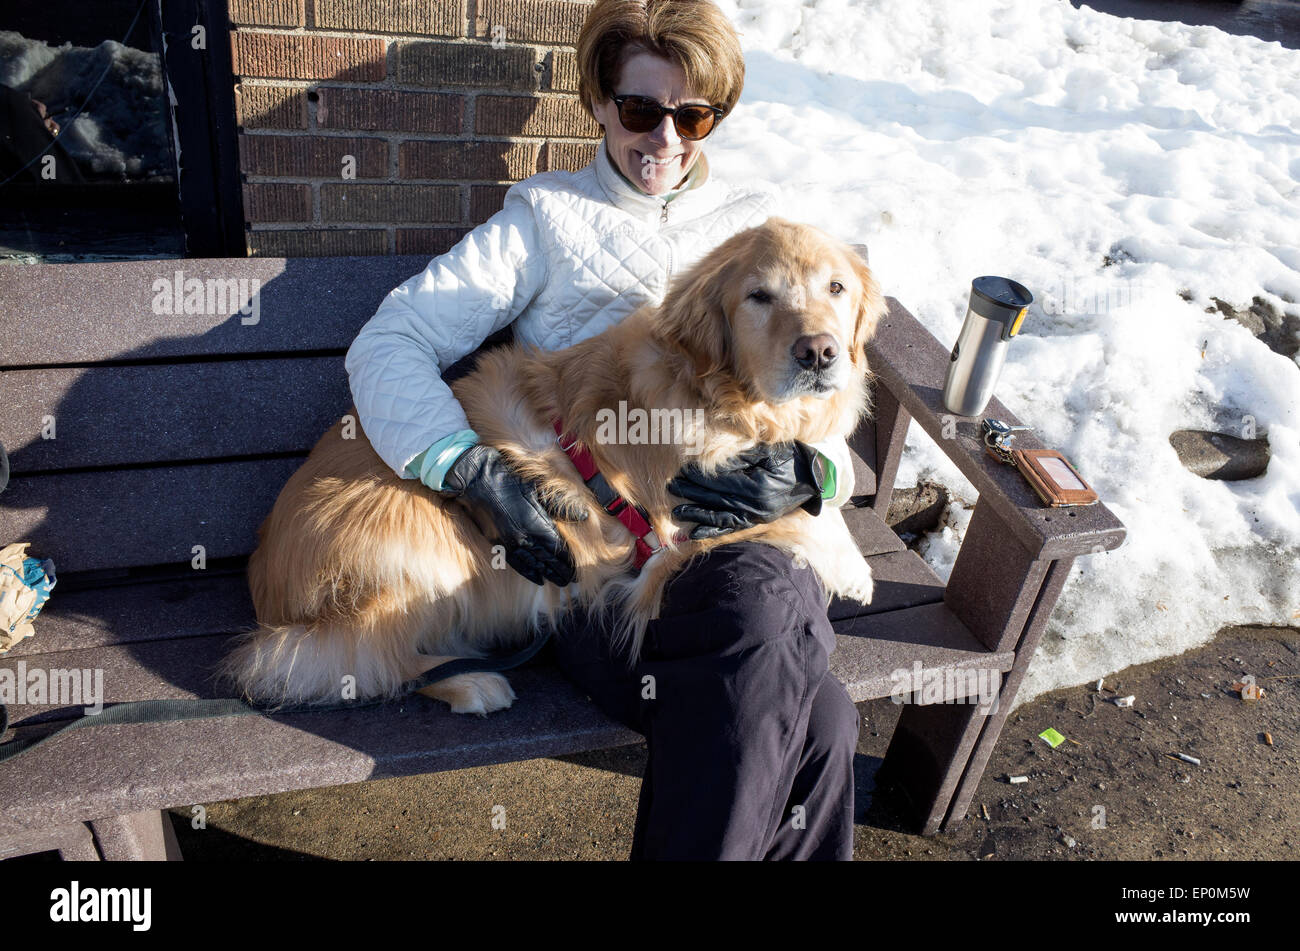 Woman drinking coffee outside soaking up the winter sun with her golden retriever dog on her lap. St Paul Minnesota MN USA Stock Photo